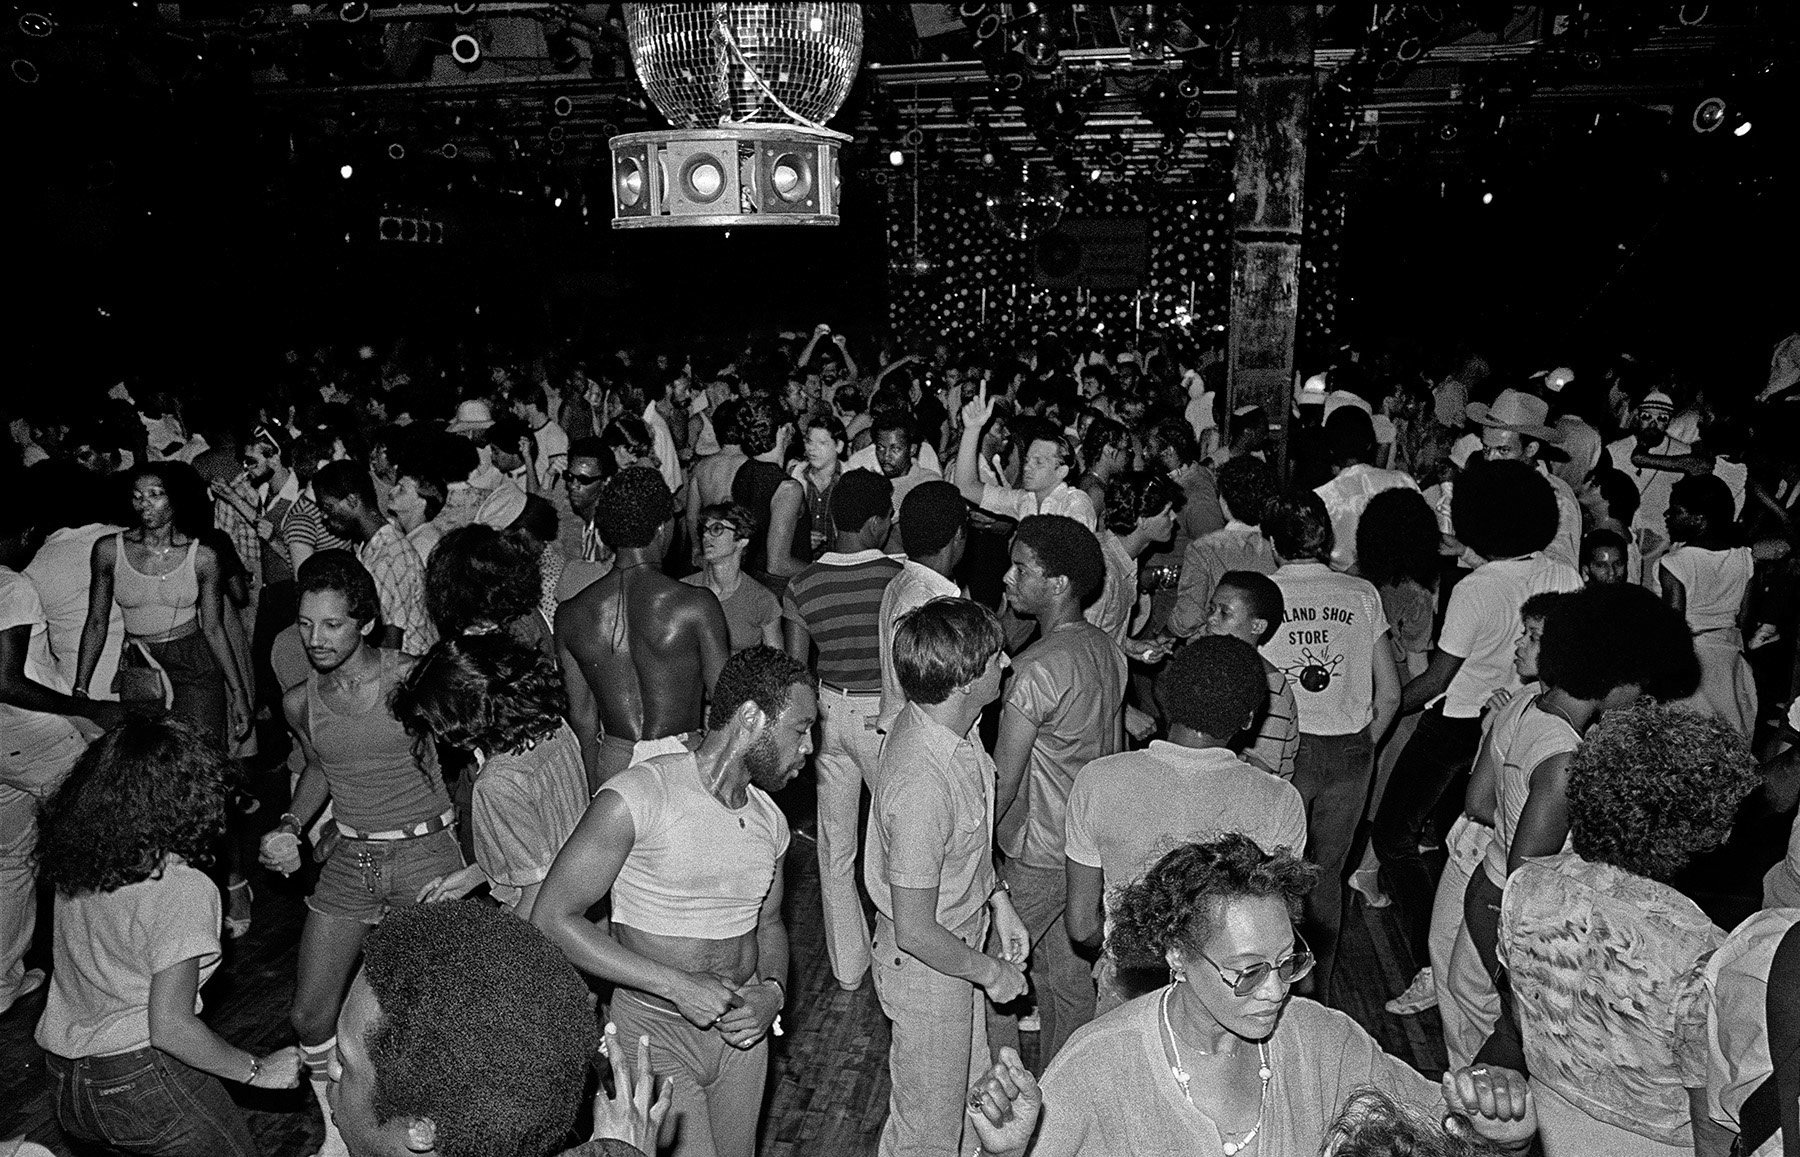 Studio 54 Reveals Never-Before-Seen Photograph and Pixel Art NFTs of the Famed Disco Club 